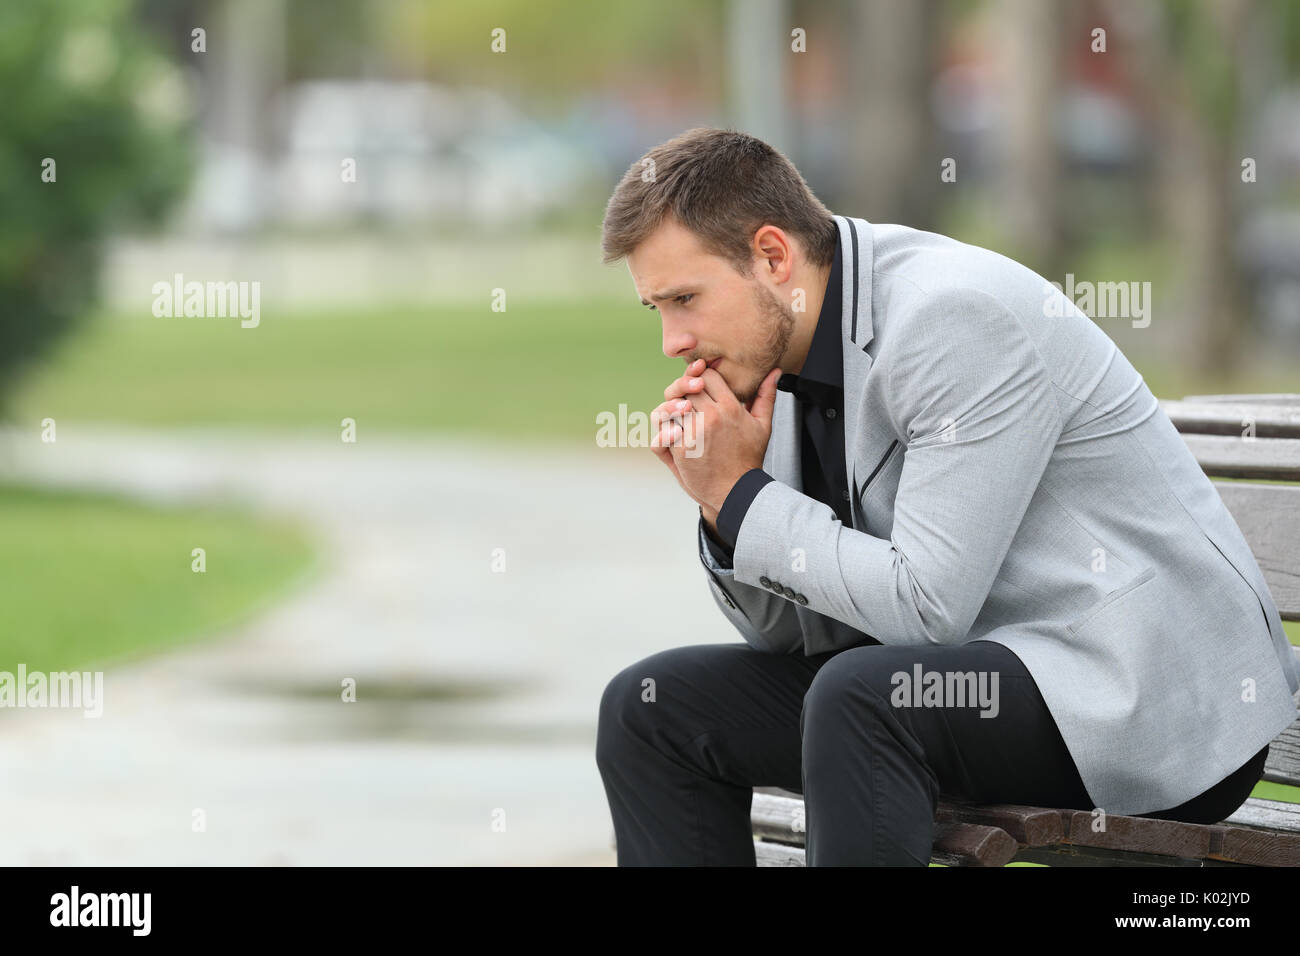 Side view portrait of a worried businessman sitting on a bench in a park Stock Photo